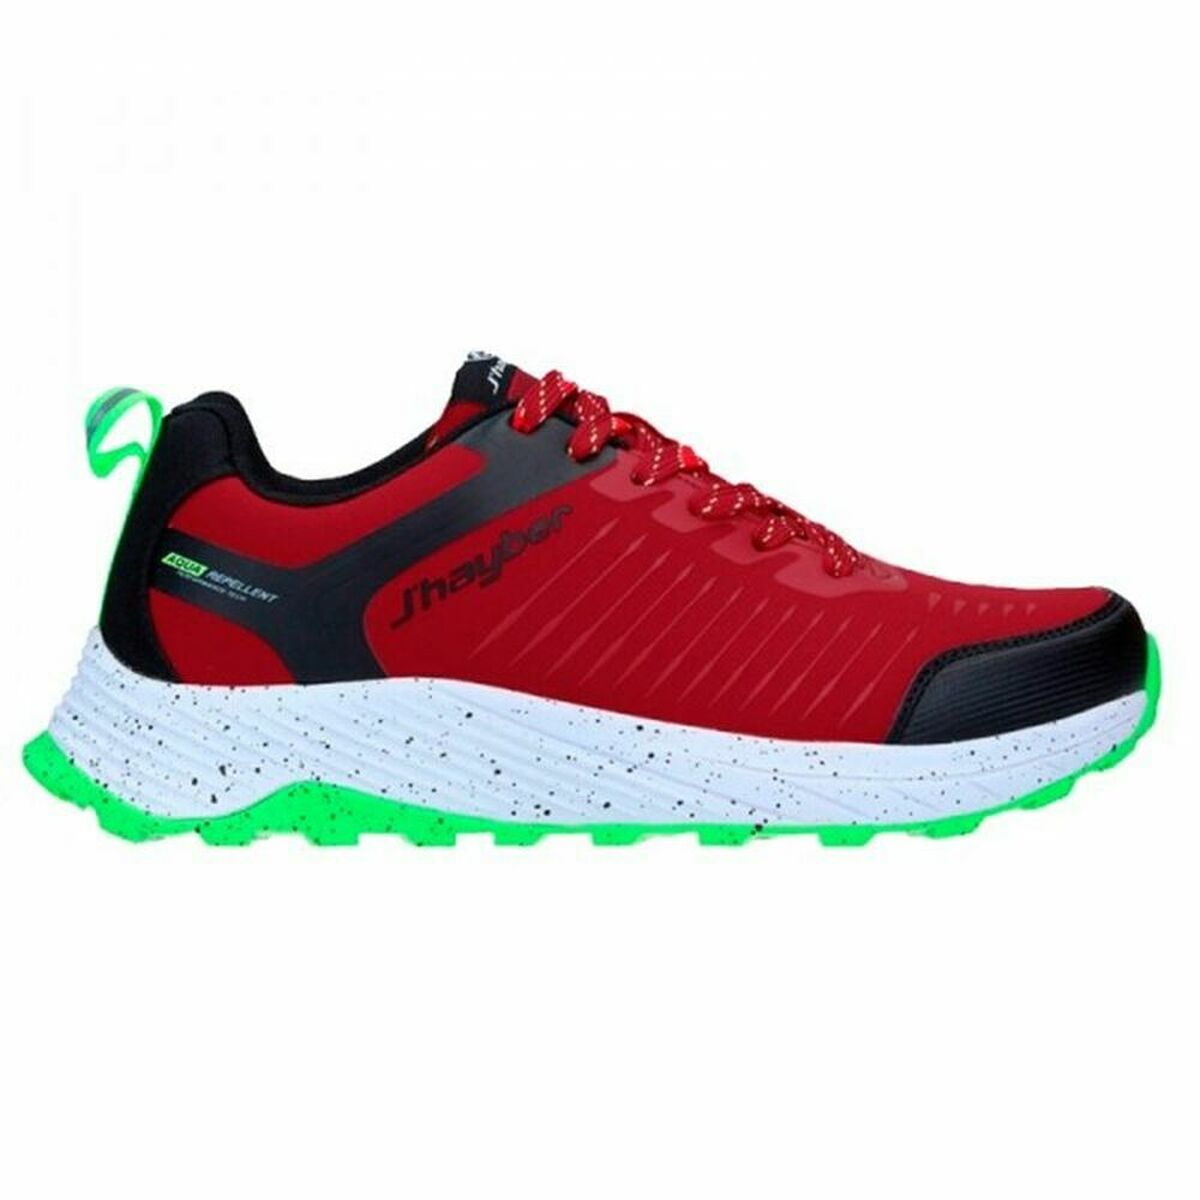 Chaussures de Running pour Adultes J-Hayber Macro Montagne Rouge